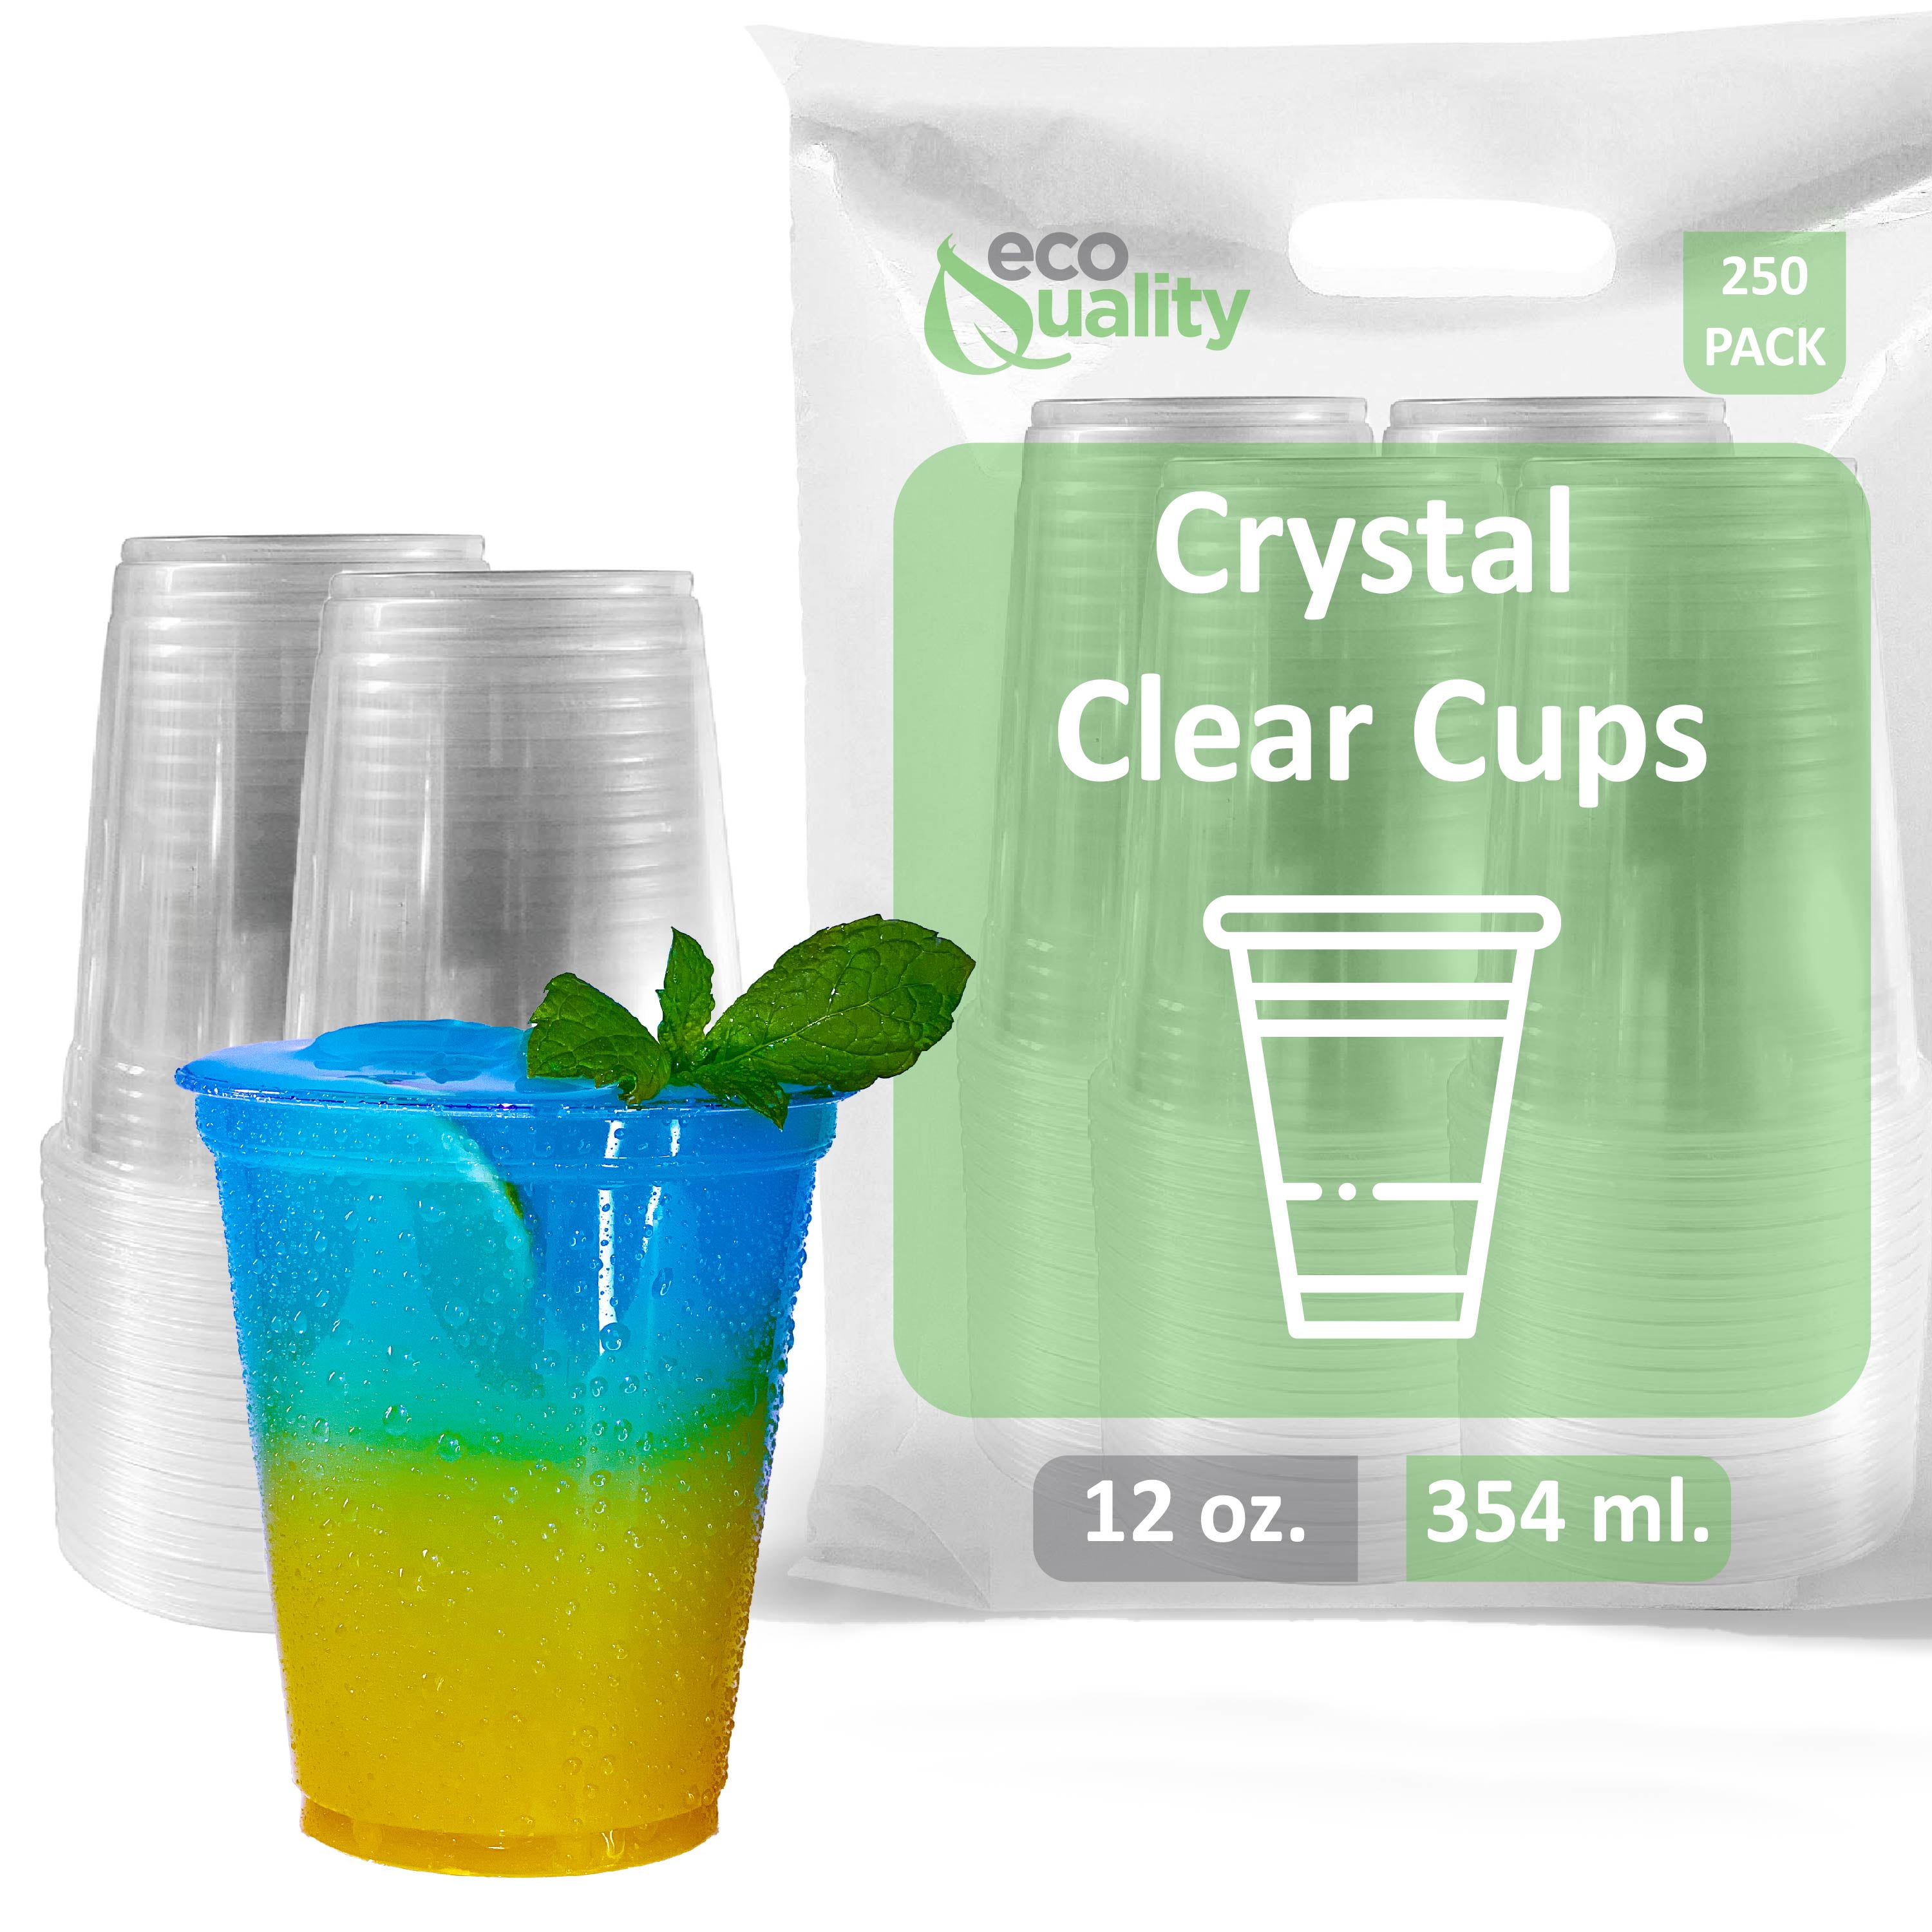 250ml Clear Reusable Plastic Festival Beer & Drinks Cups